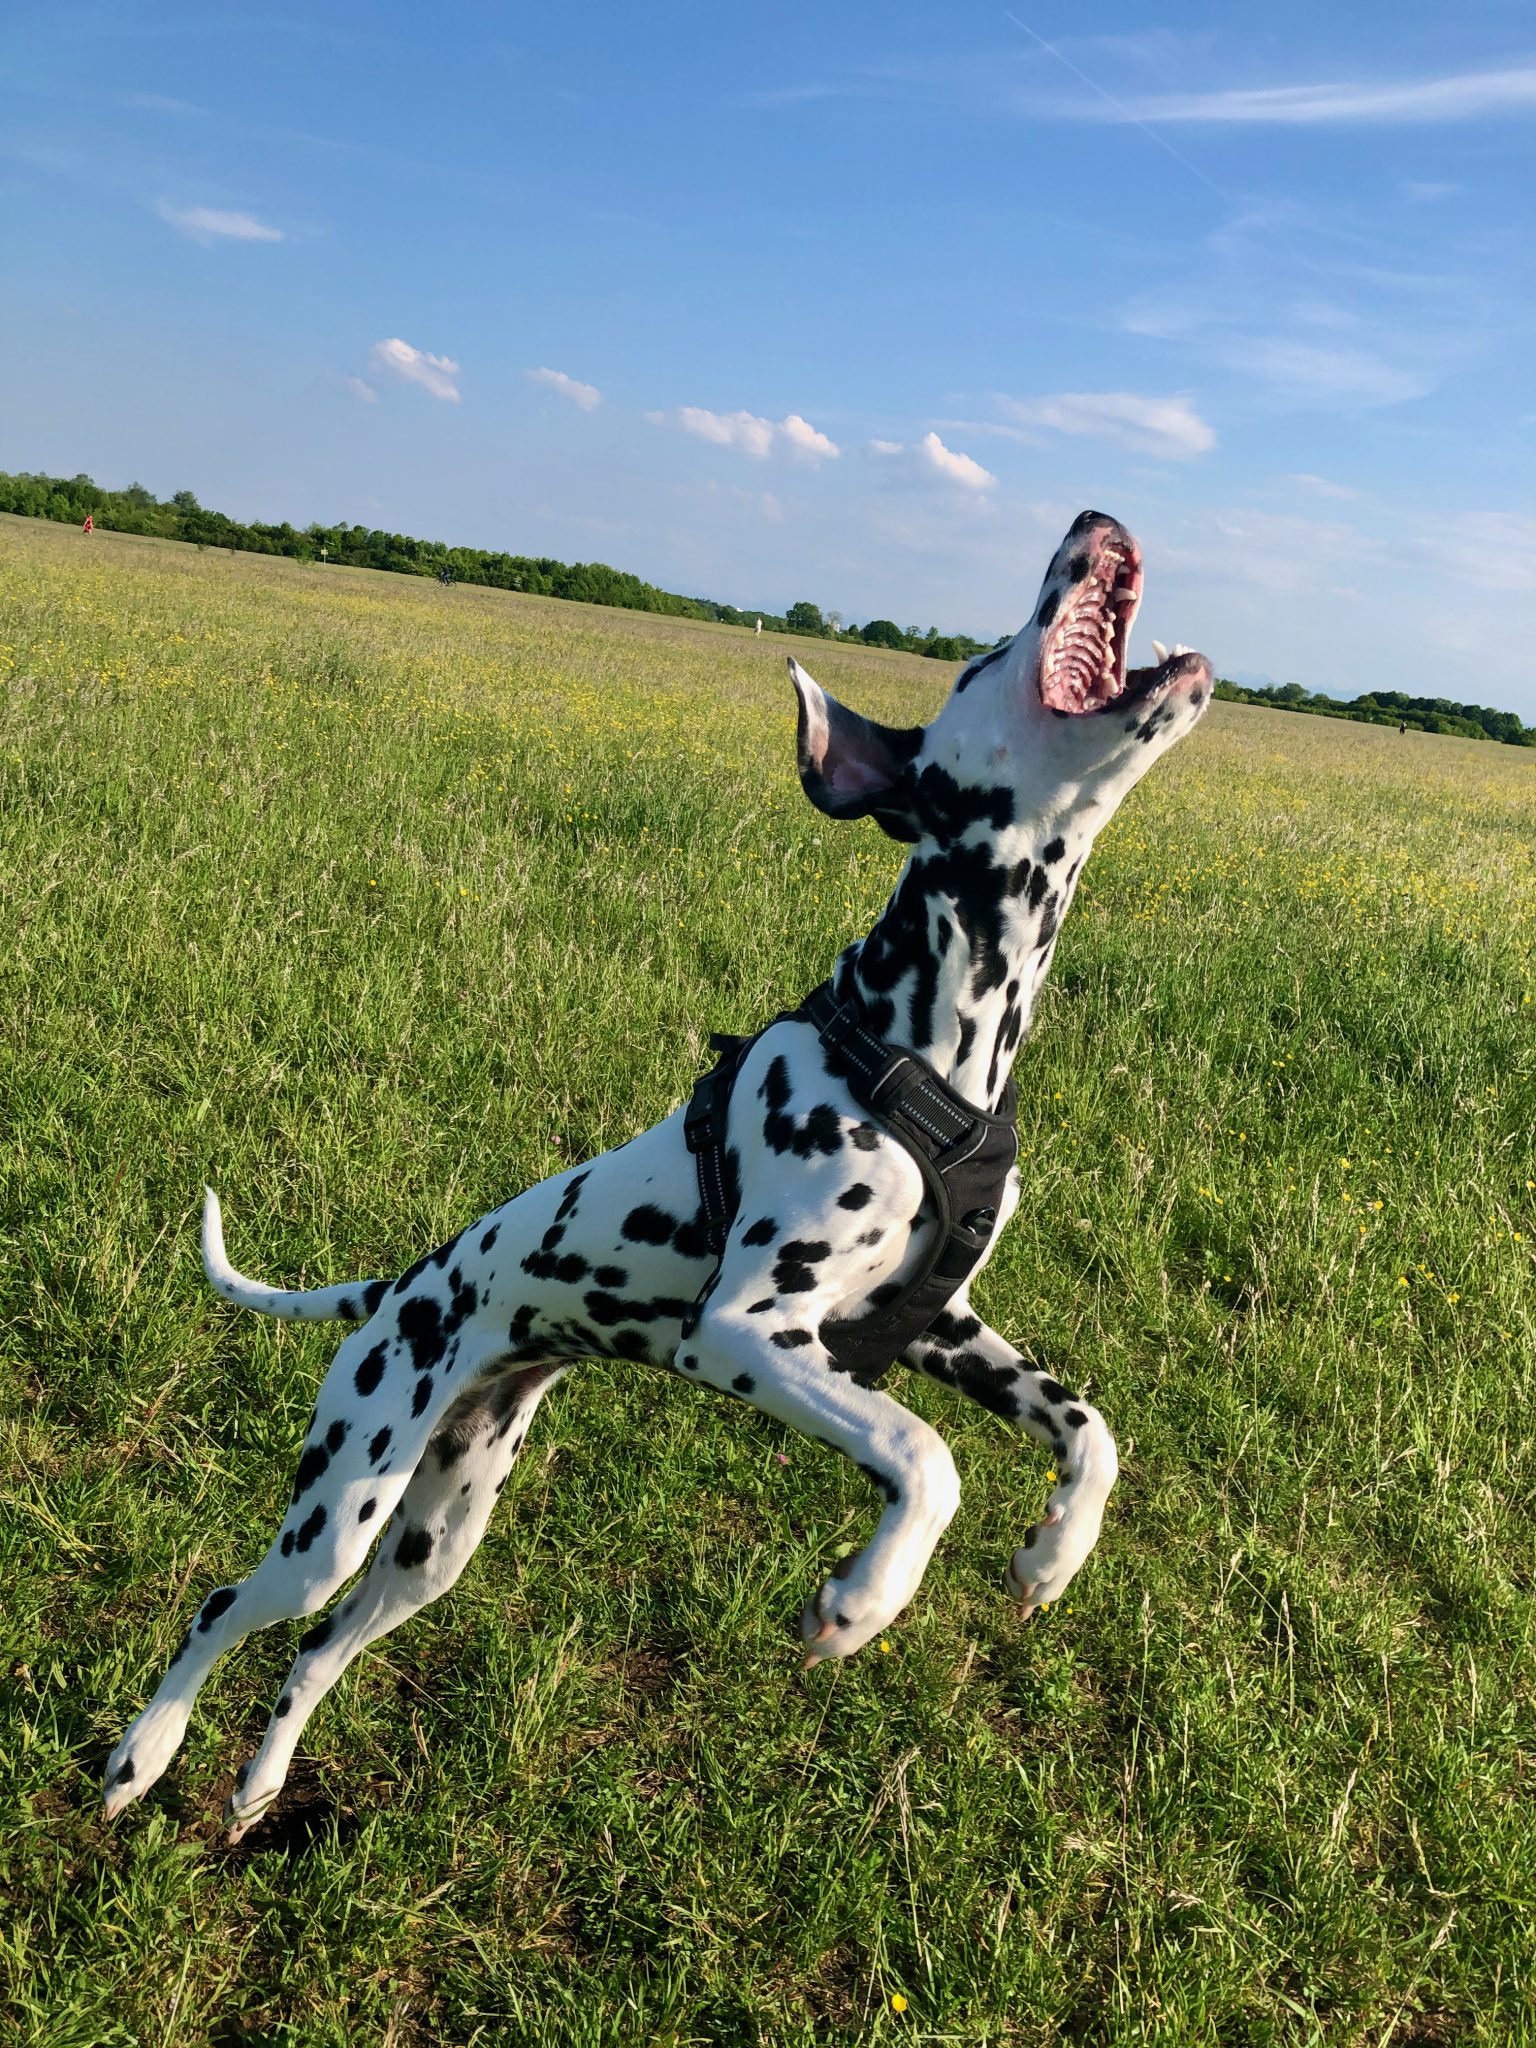 Dalmatian "Emma" is jumping for a treat.